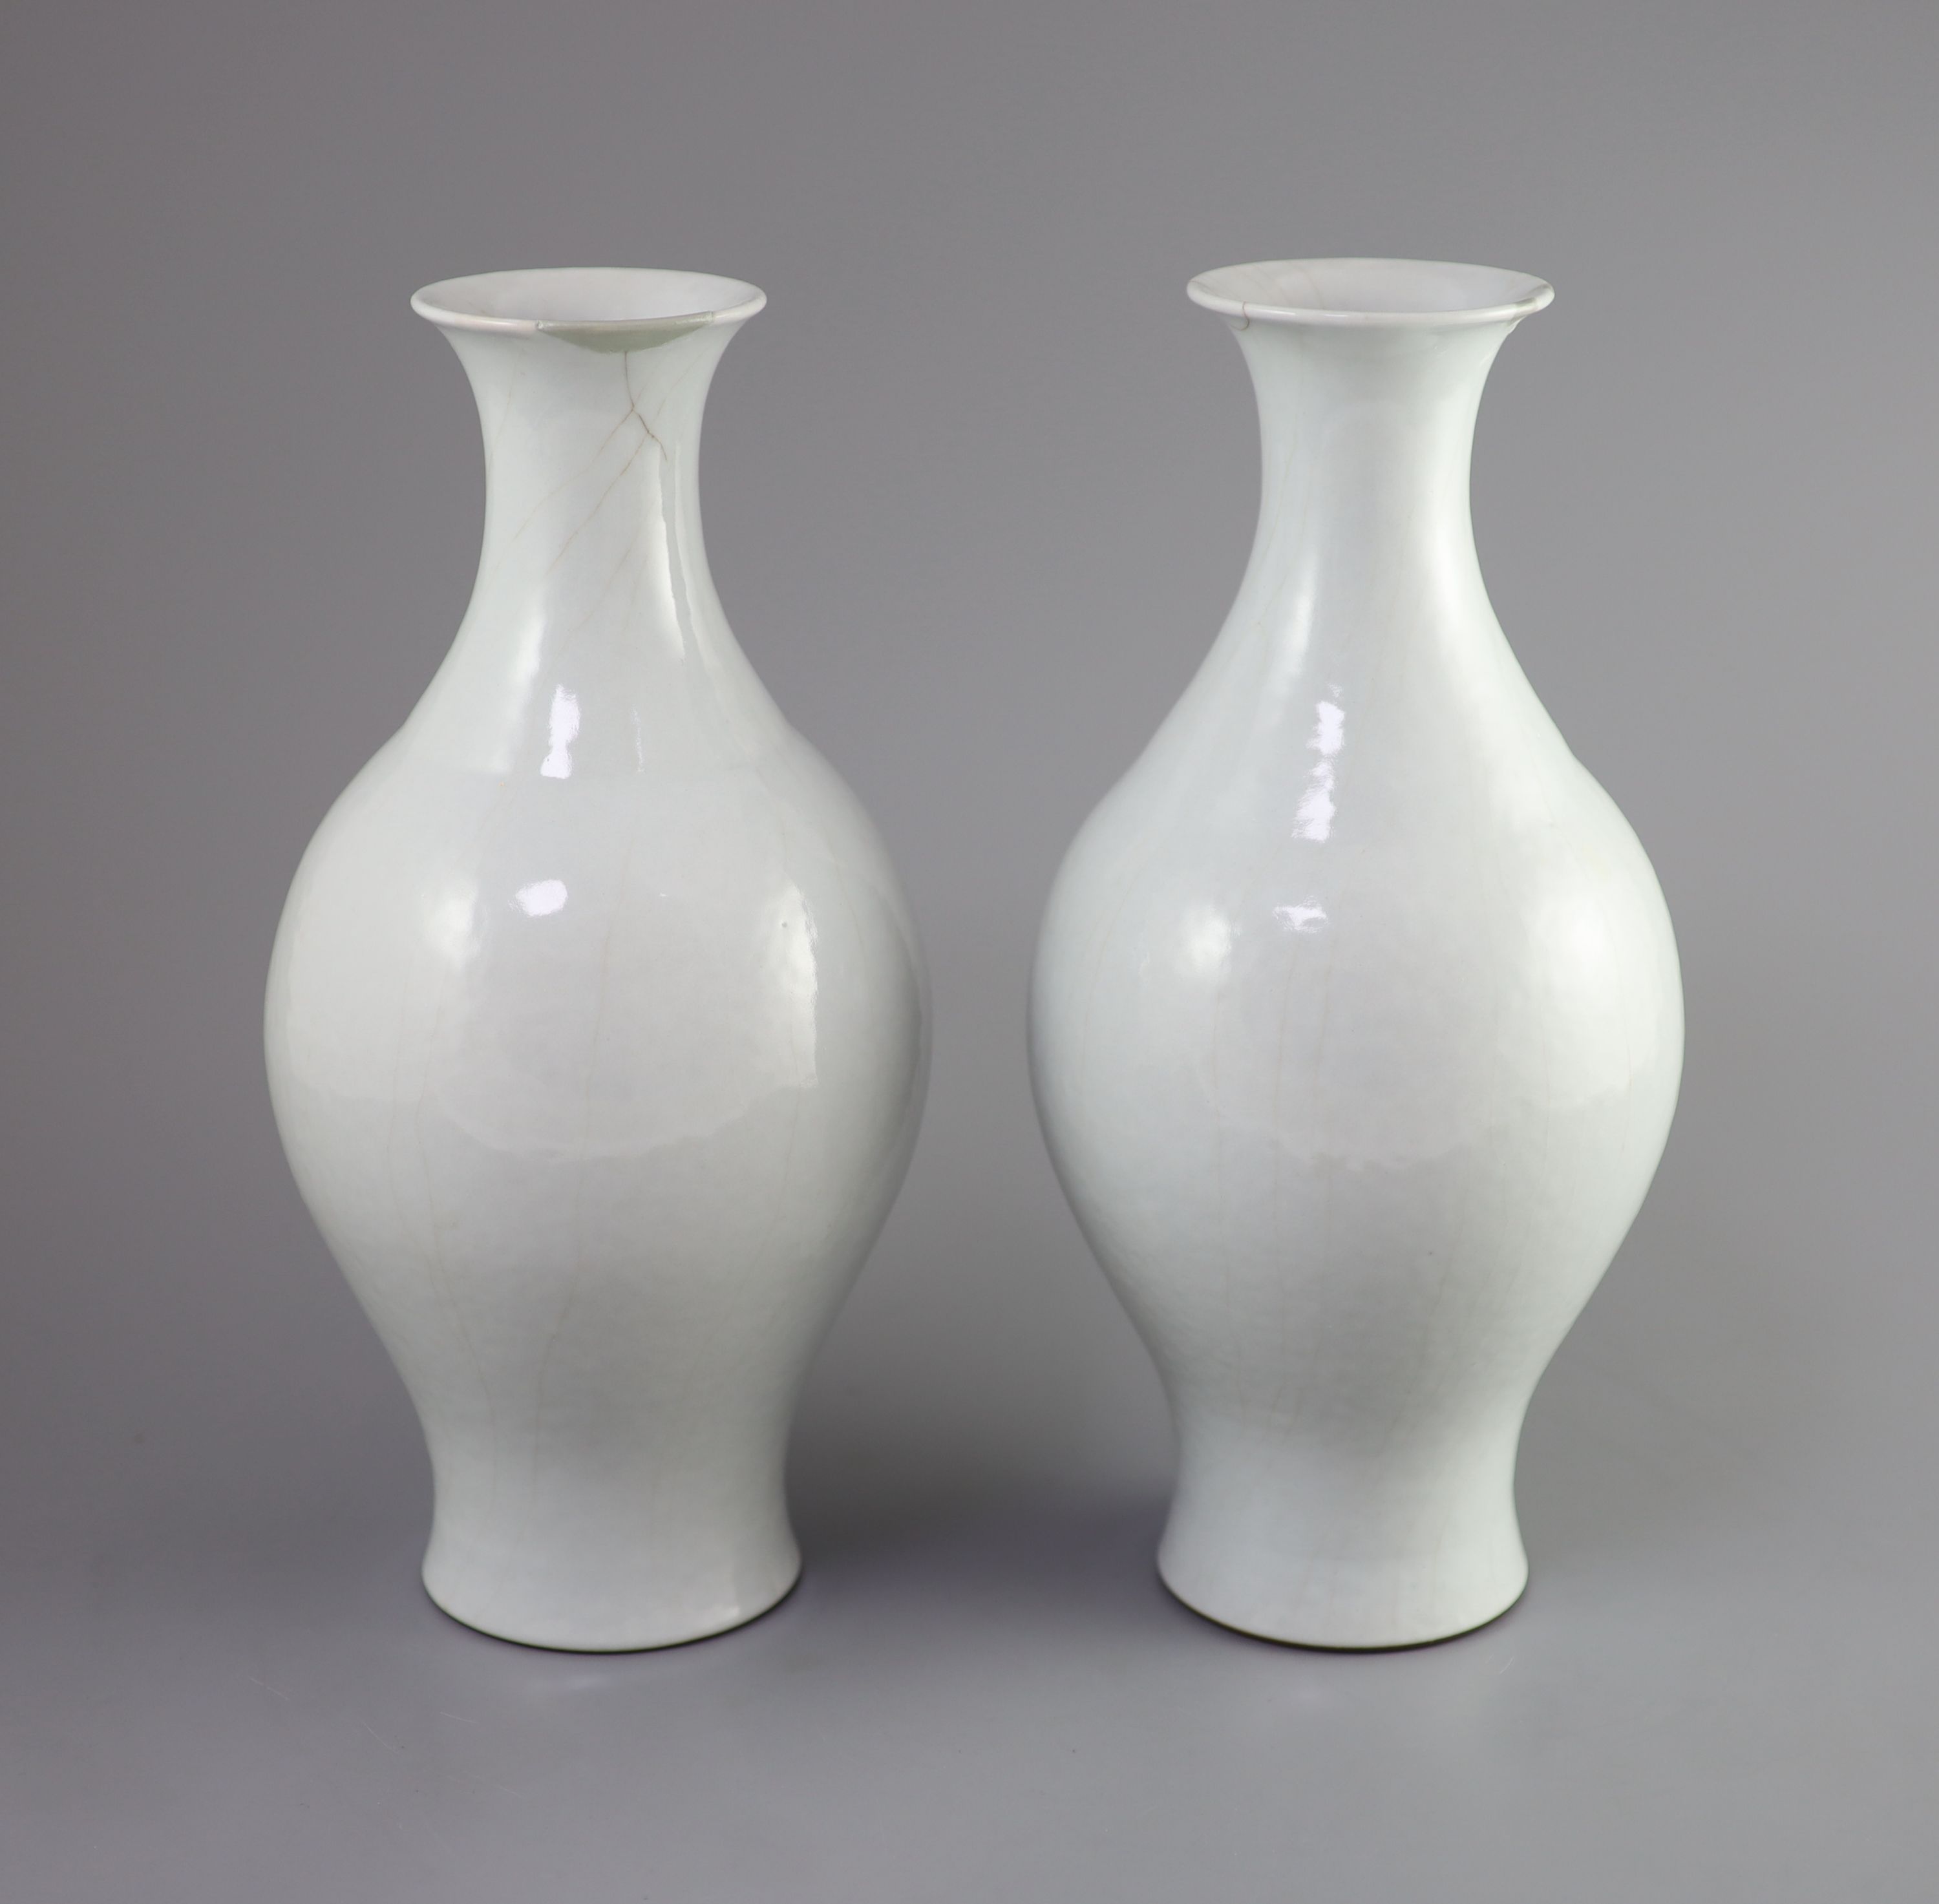 A pair of Chinese Guan-type vases, ganlan, Qianlong seal mark and possibly of the period, 31.5cm high, repairs